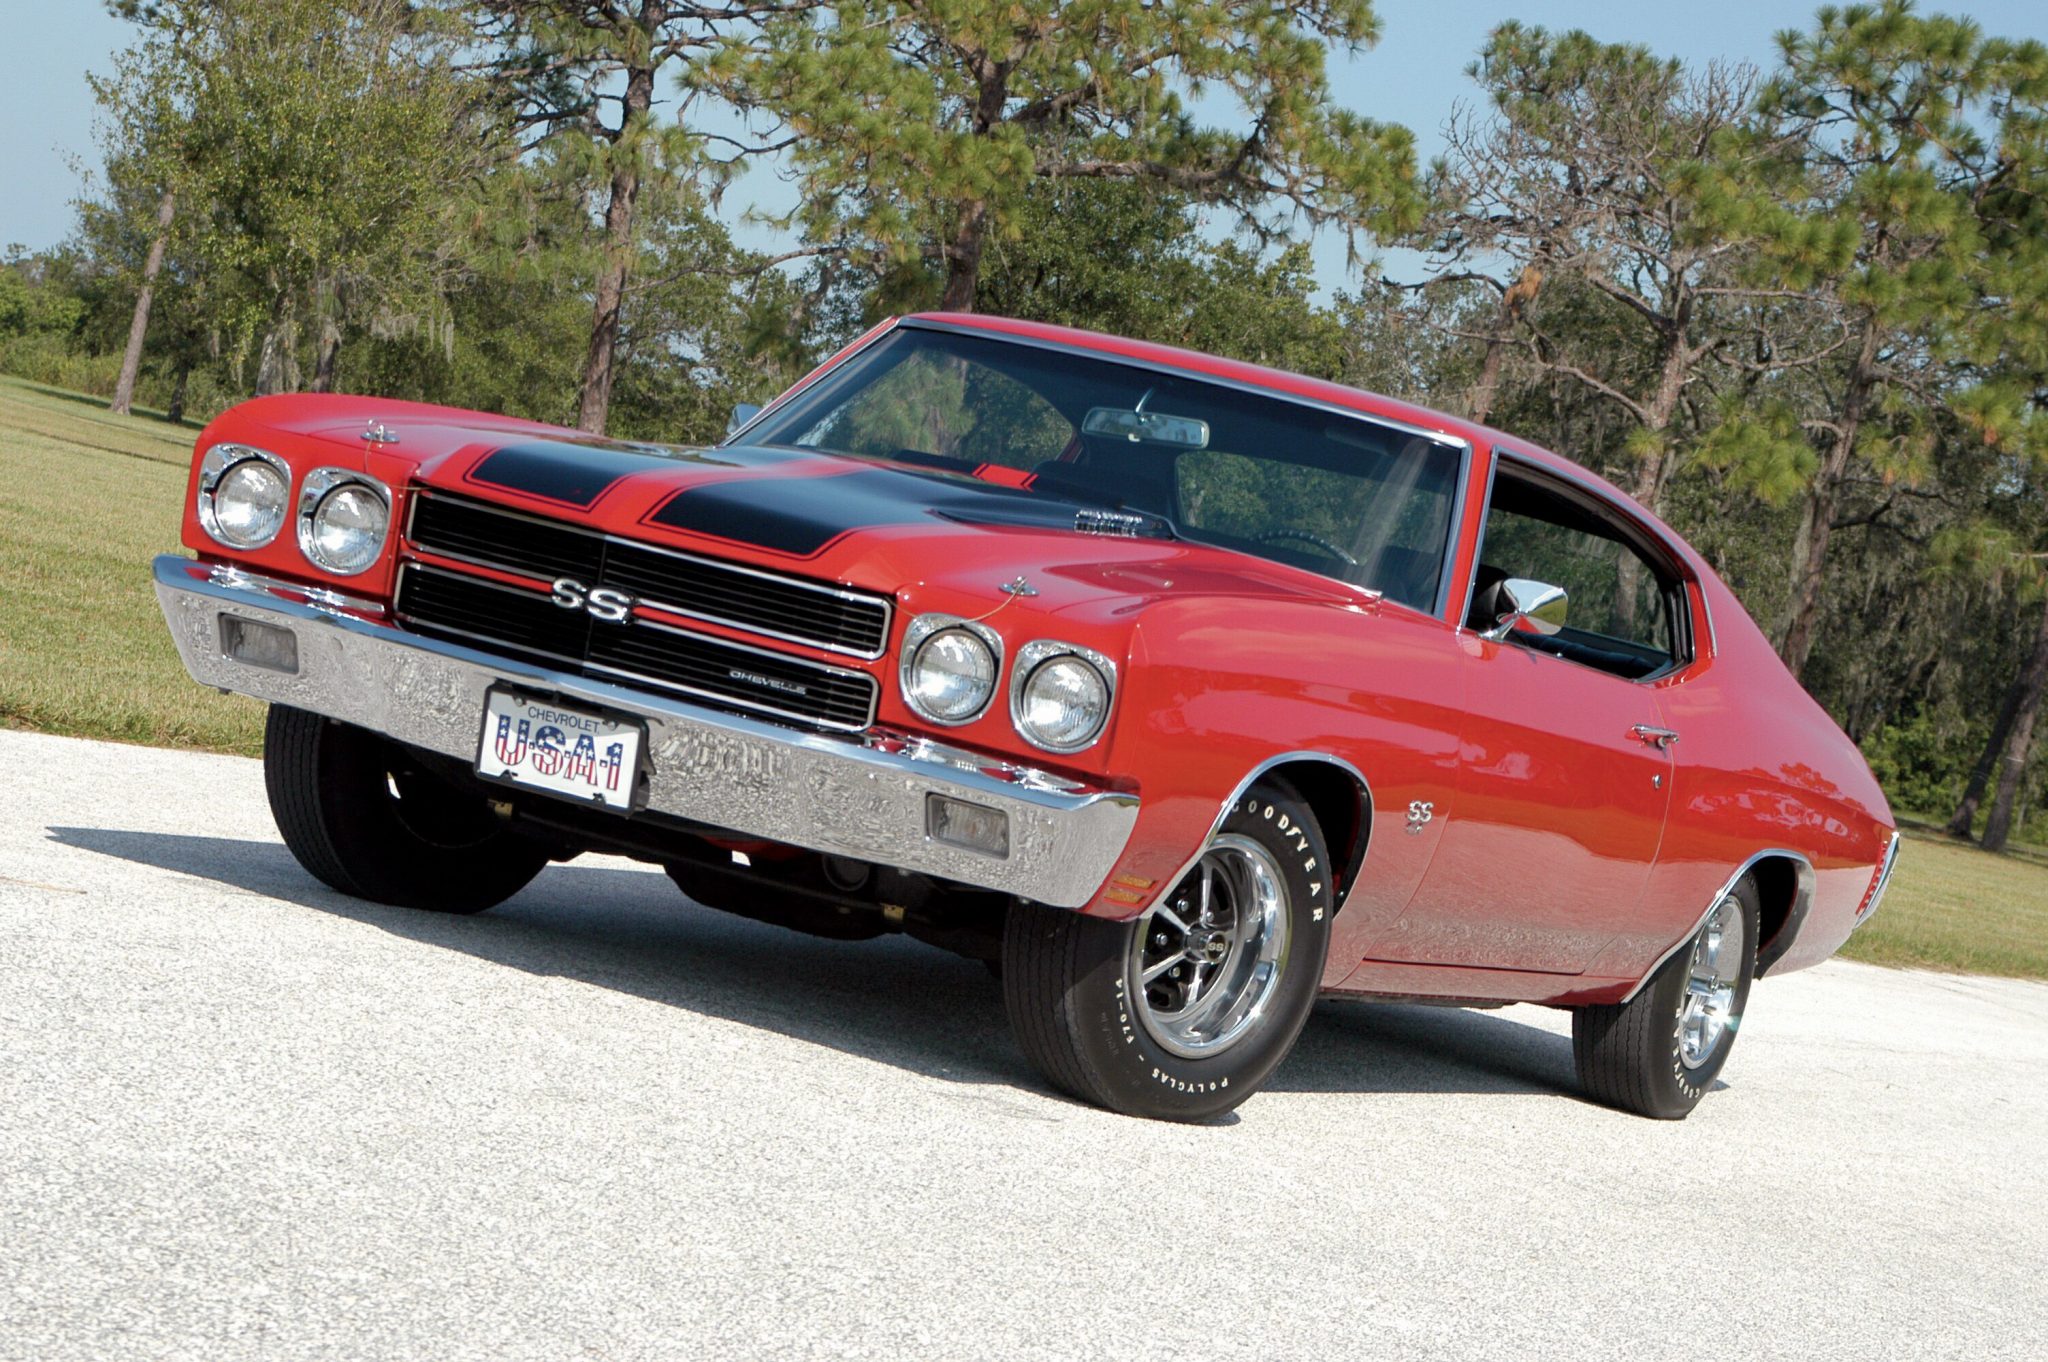 The Ultimate Muscle Car – The 1970 LS6 Chevelle Was America's King Of